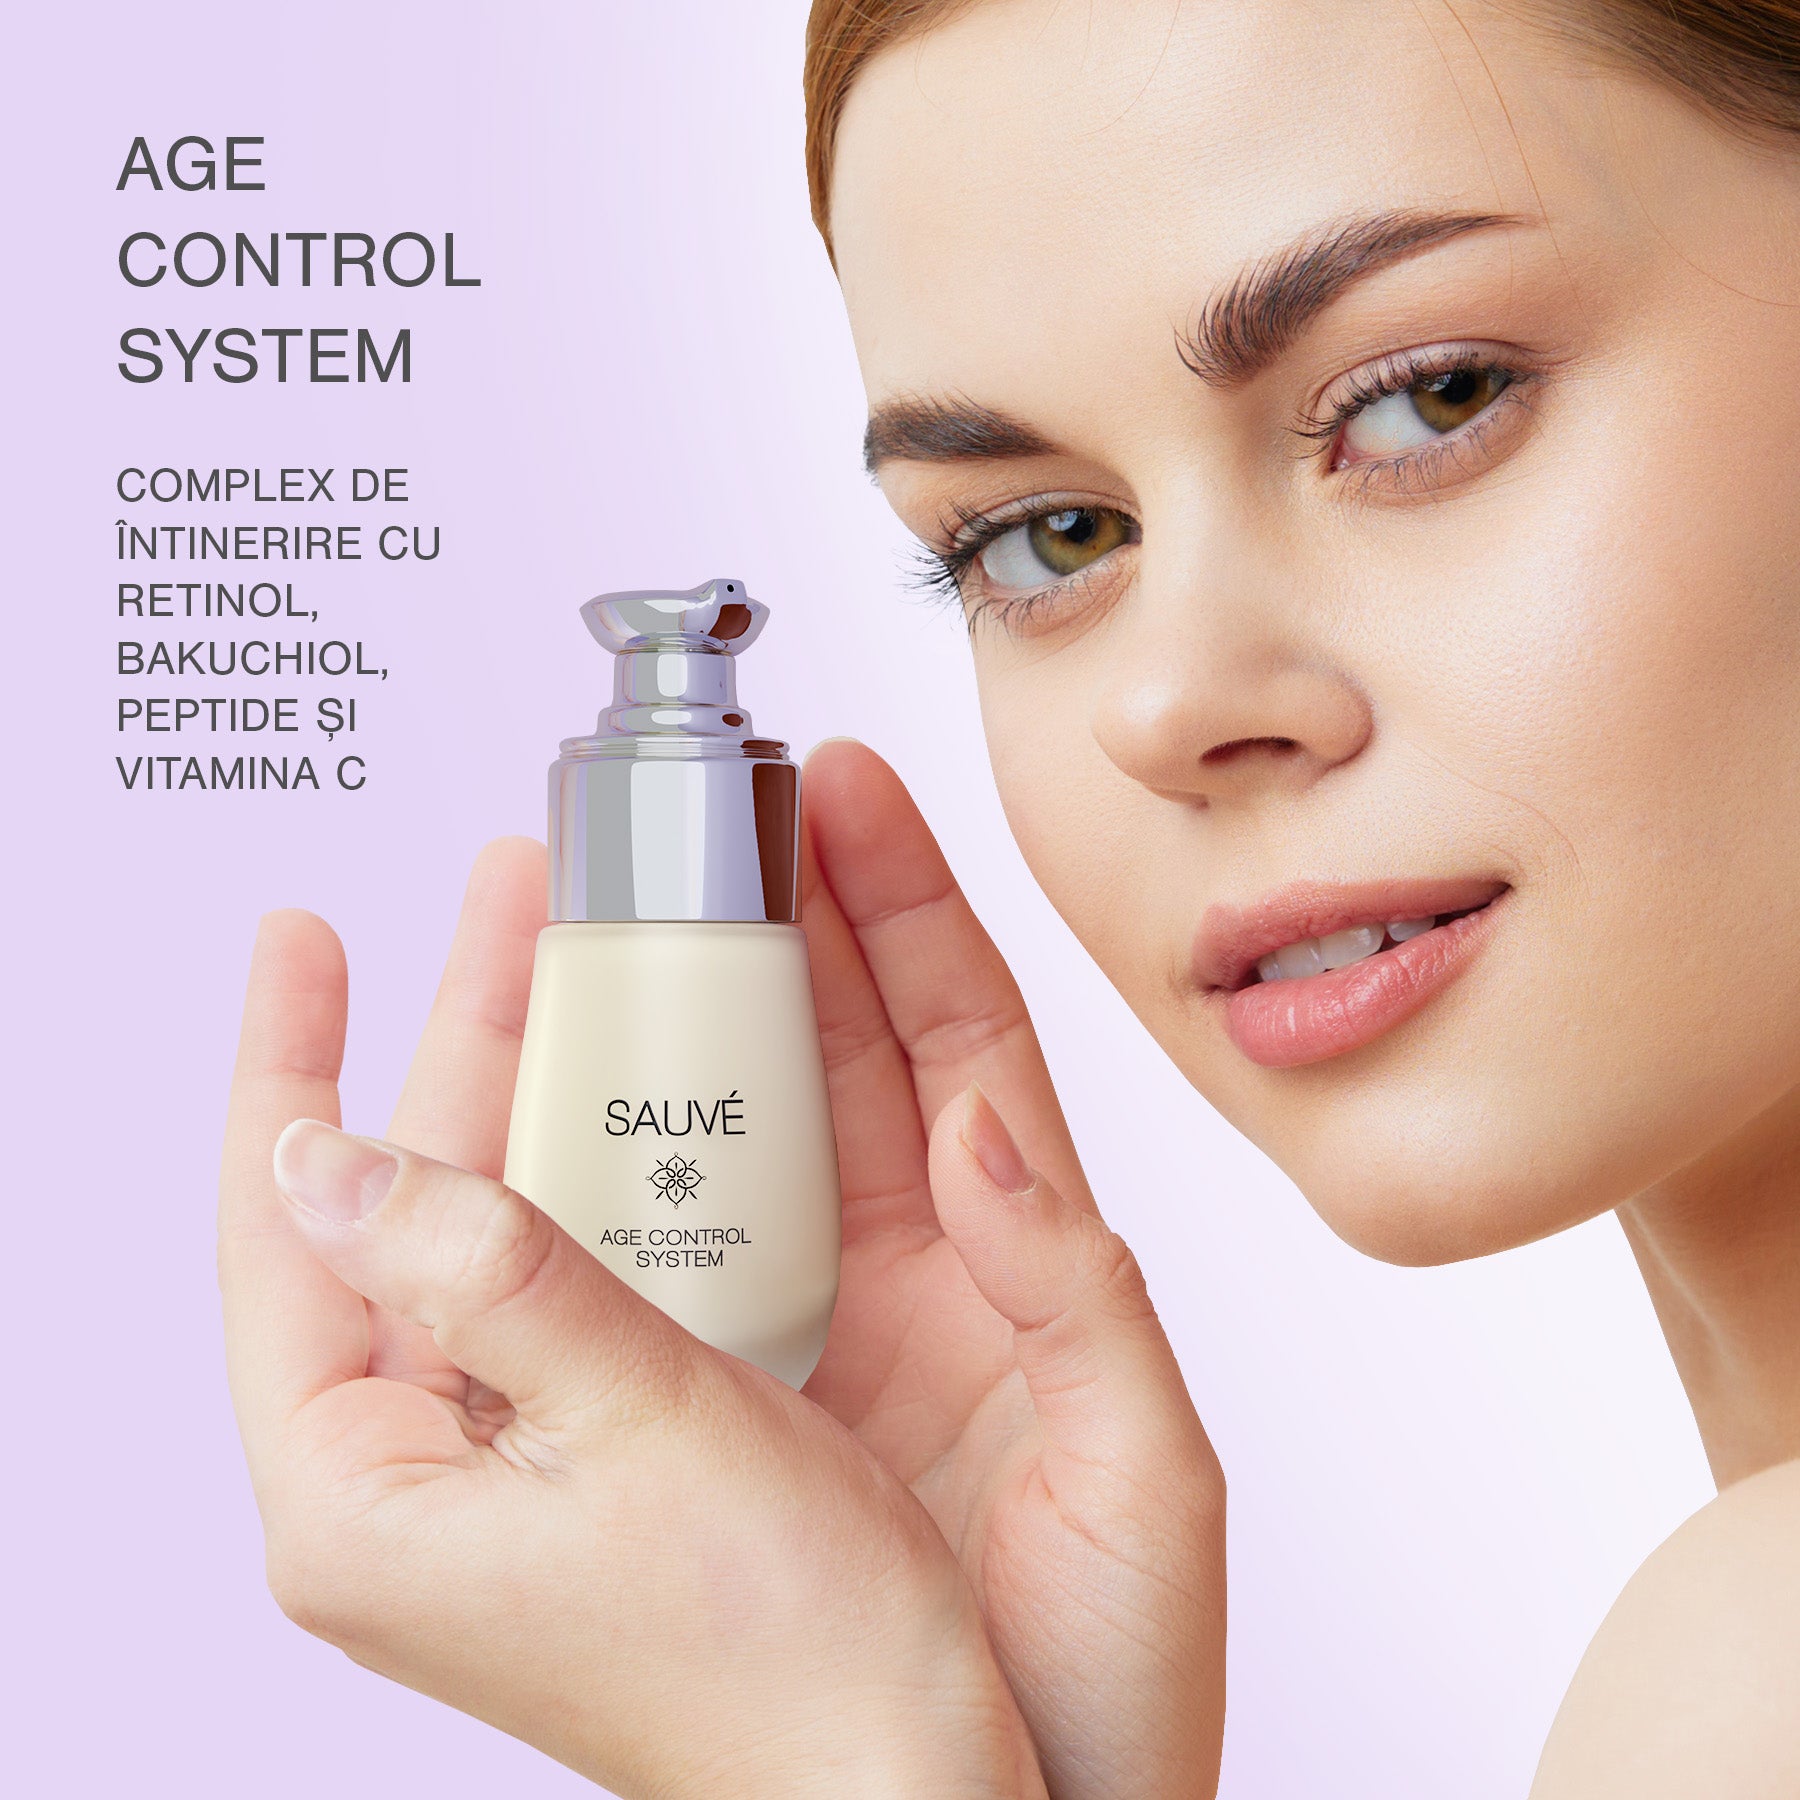 AGE CONTROL SYSTEM